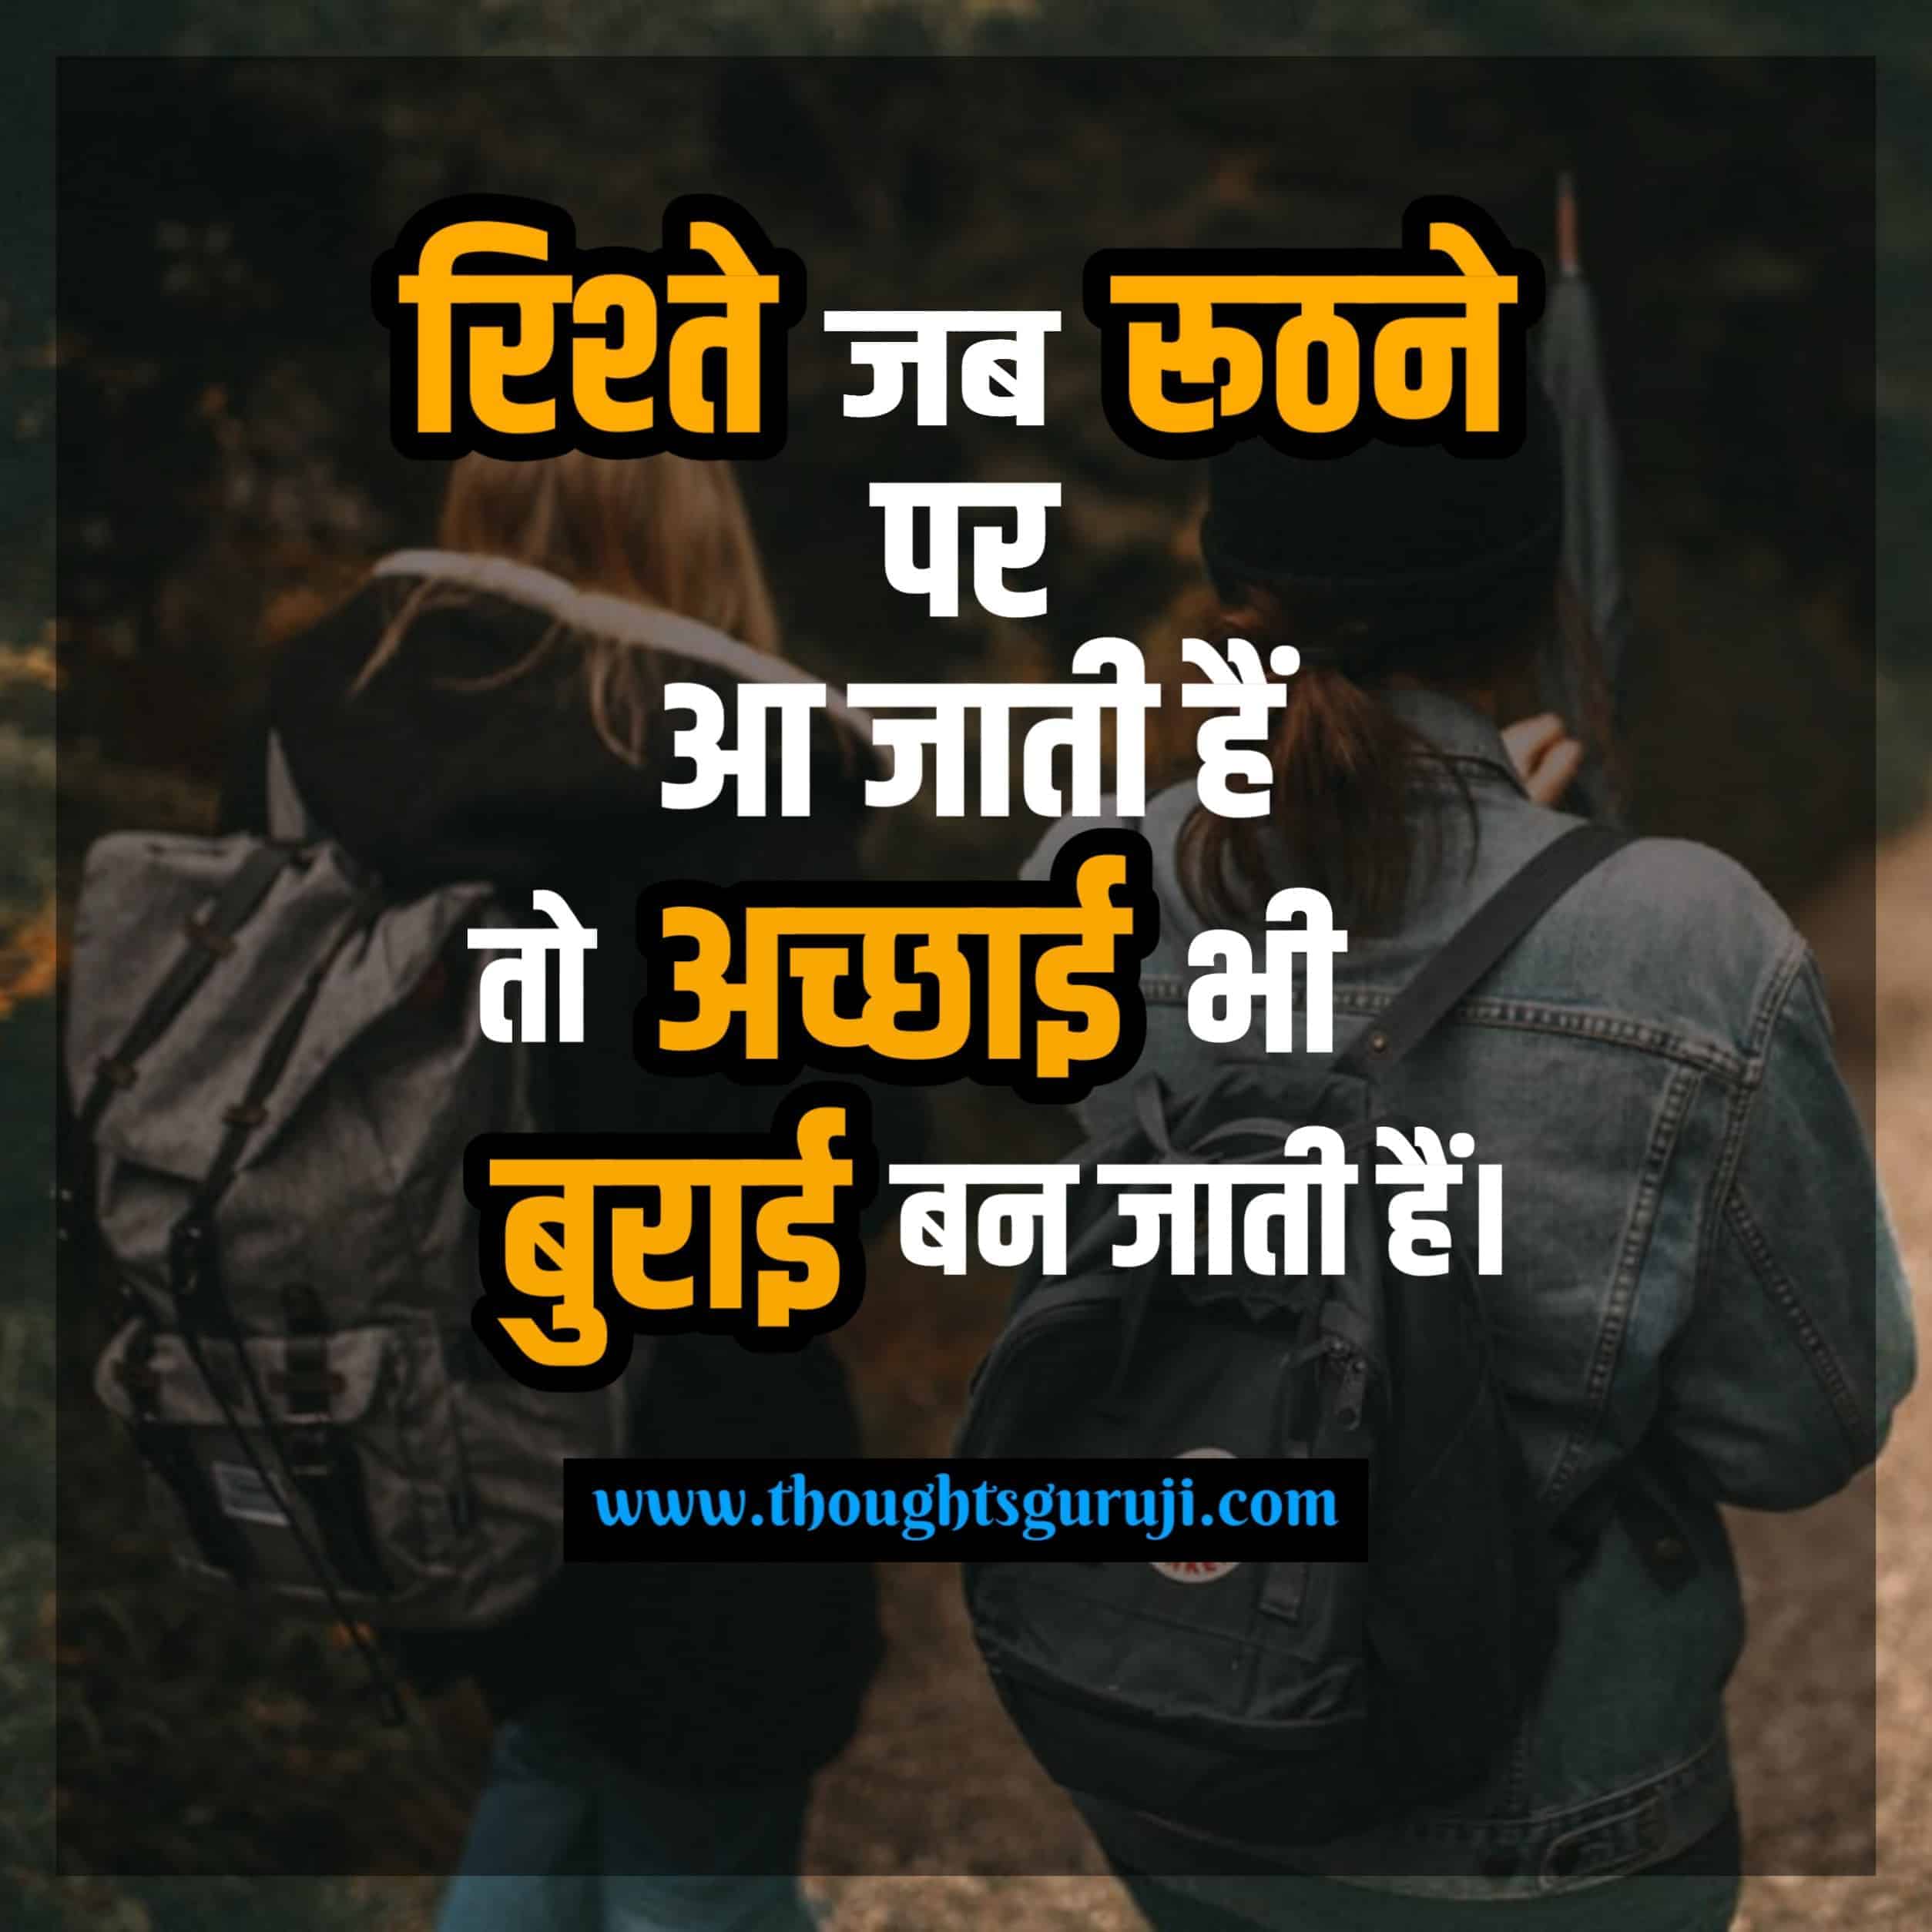 Sad Love Quotes in Hindi with Images for Whatsapp, Status, & Wallpaper